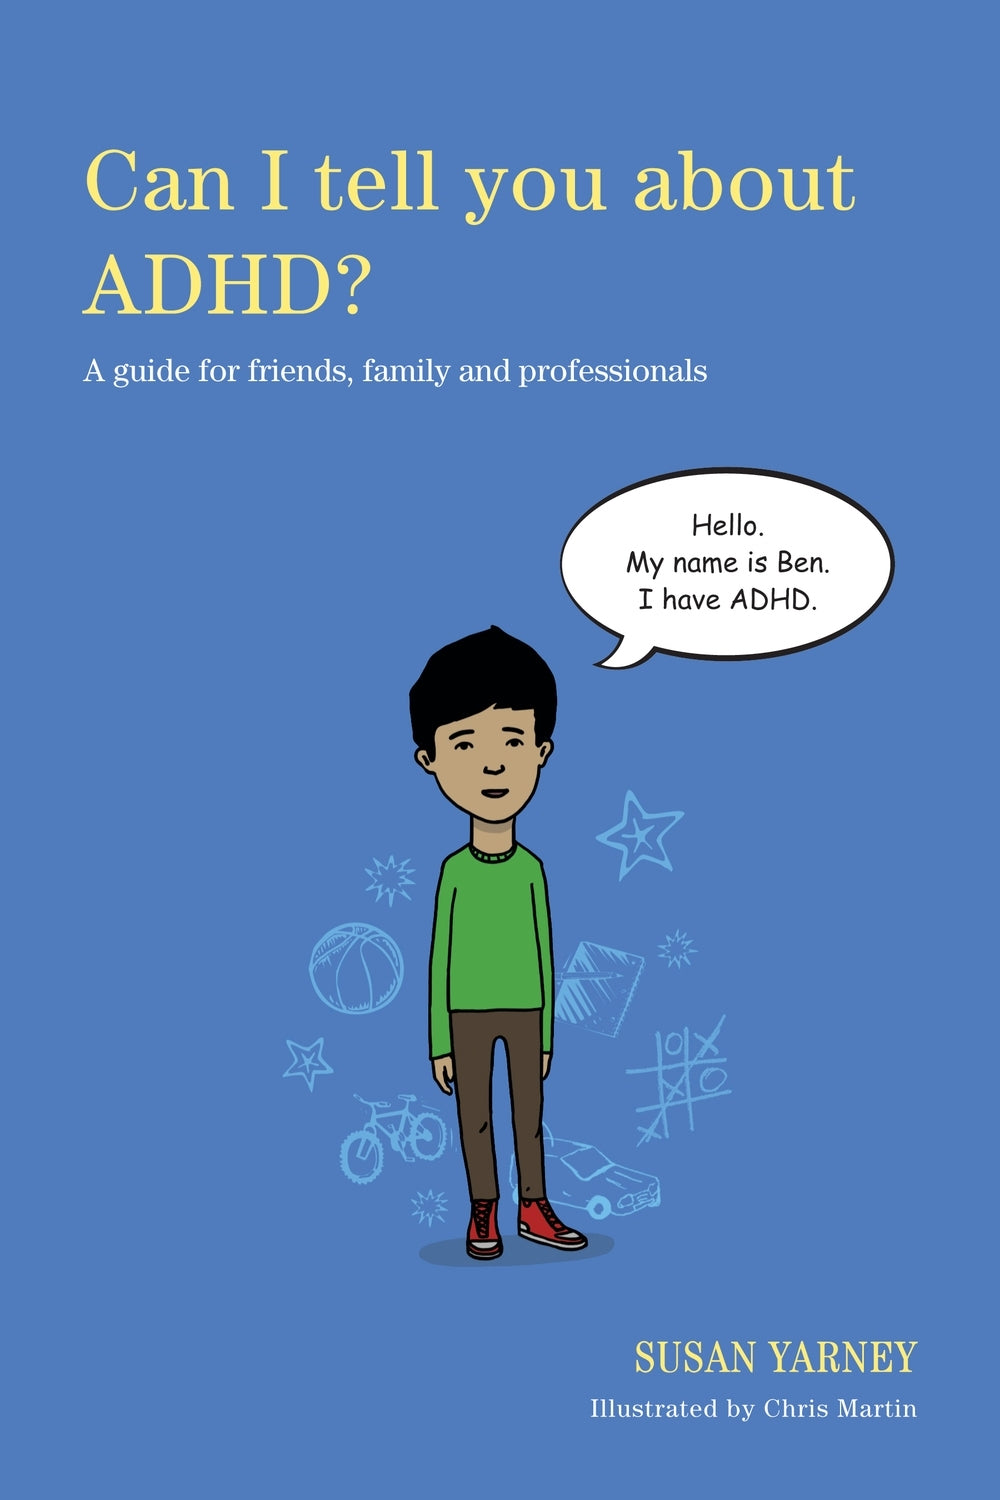 Can I tell you about ADHD? by Chris Martin, Susan Yarney